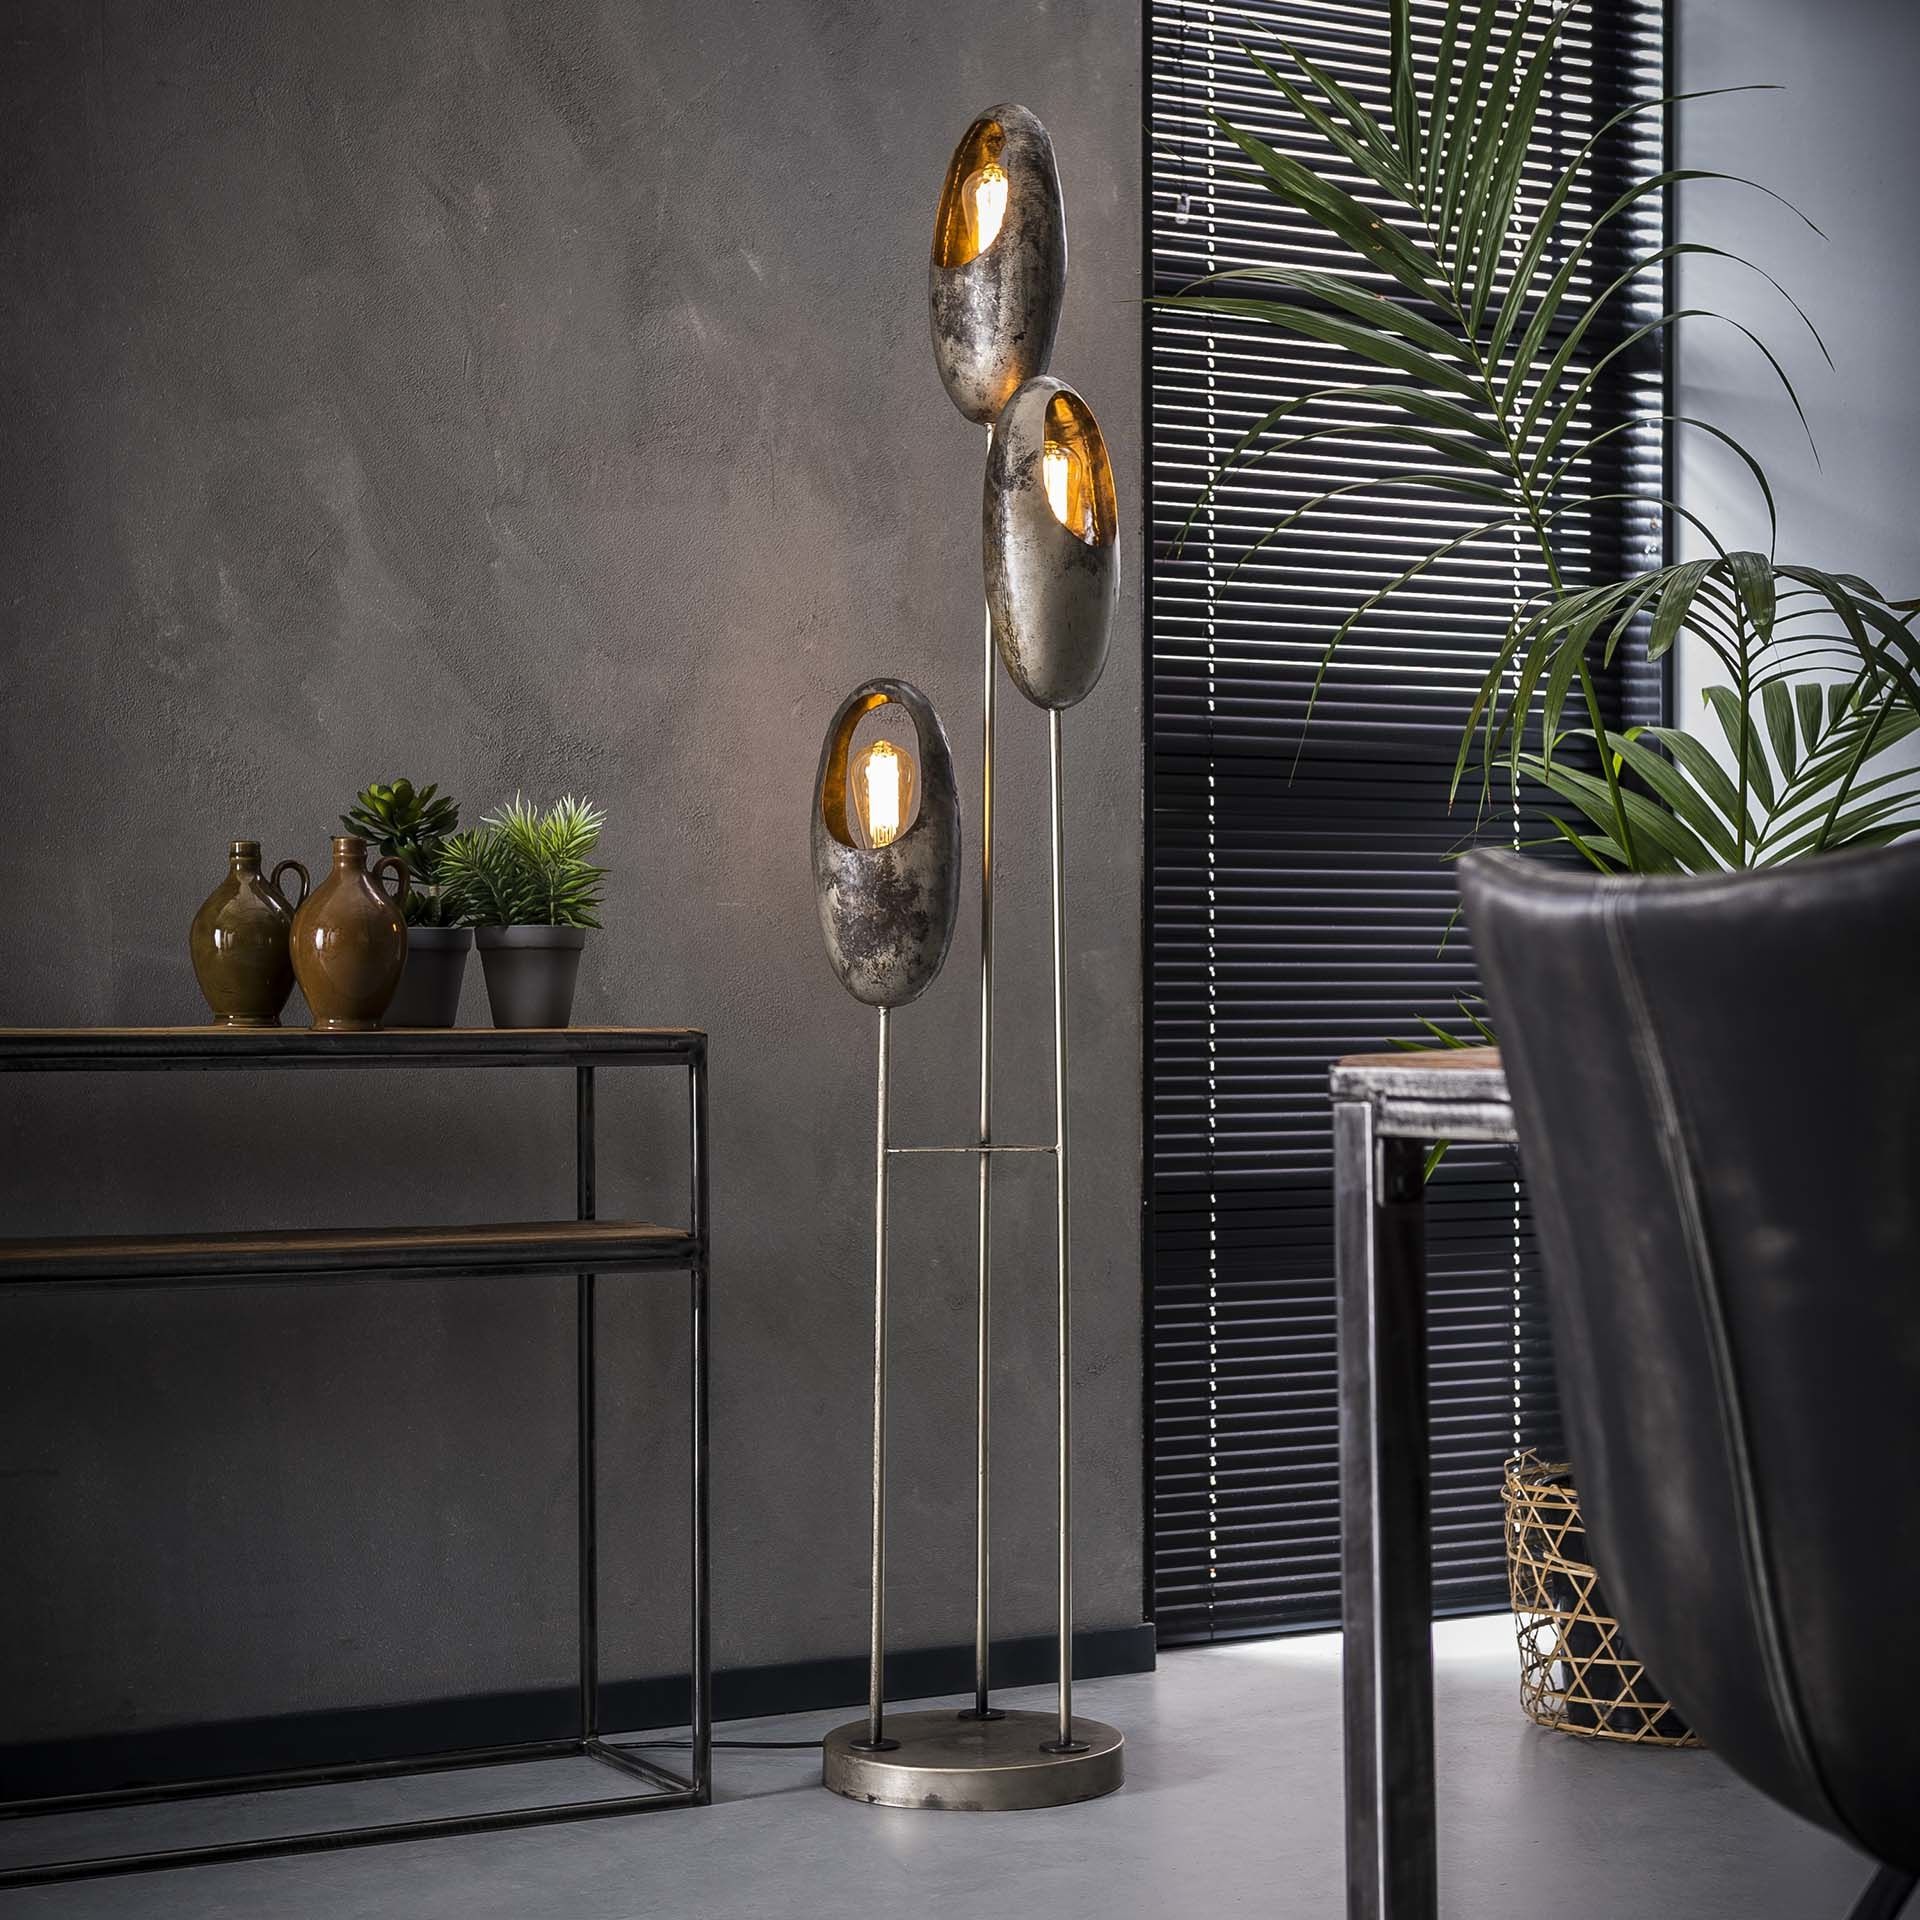 Modern Floor Lamp Stickney – Available At Furnwise! – Furnwise In 2019 Modern Floor Lamps (View 2 of 15)